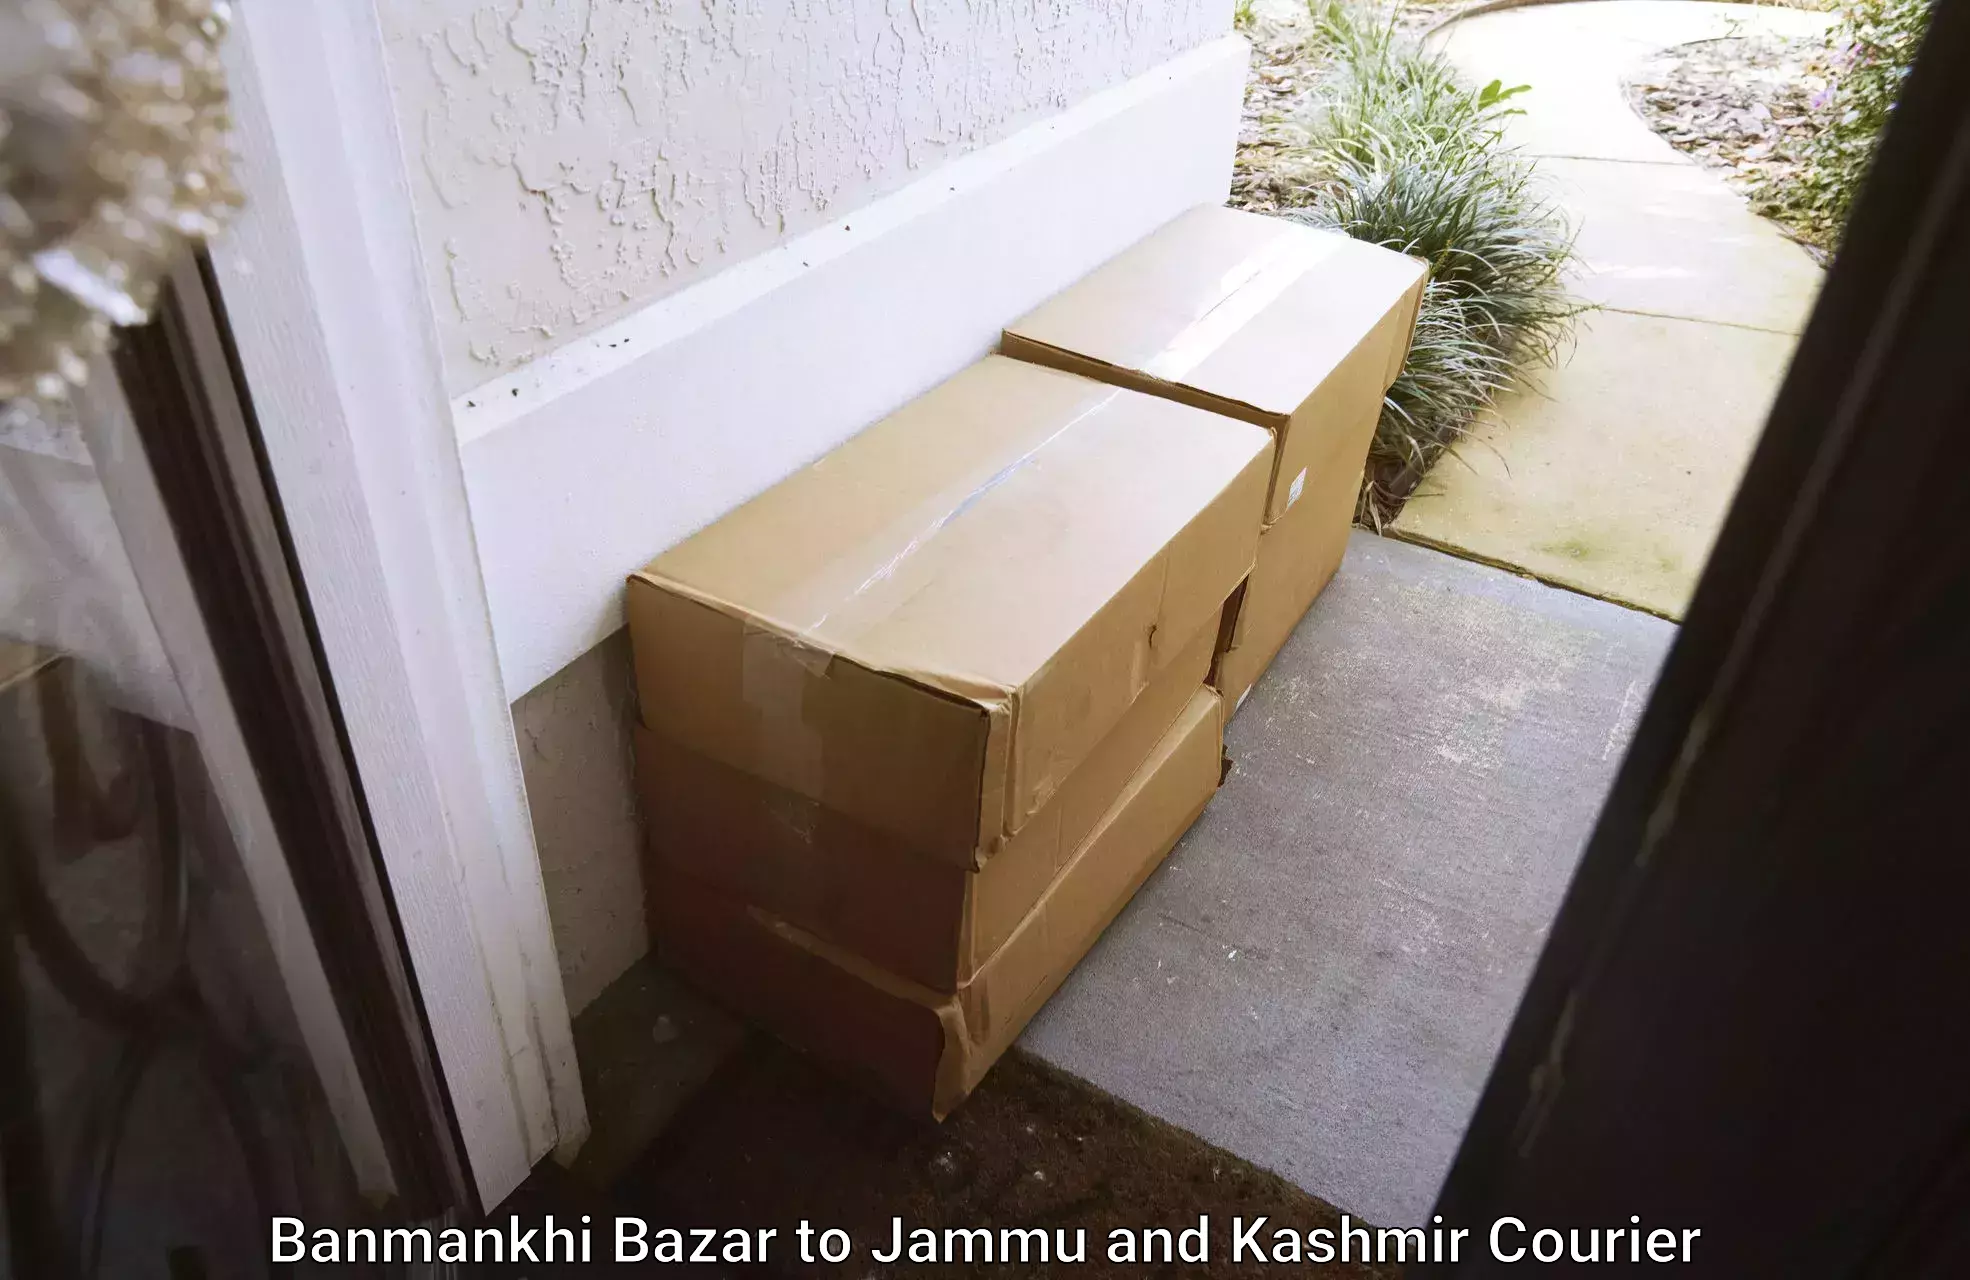 Furniture moving assistance in Banmankhi Bazar to Jammu and Kashmir